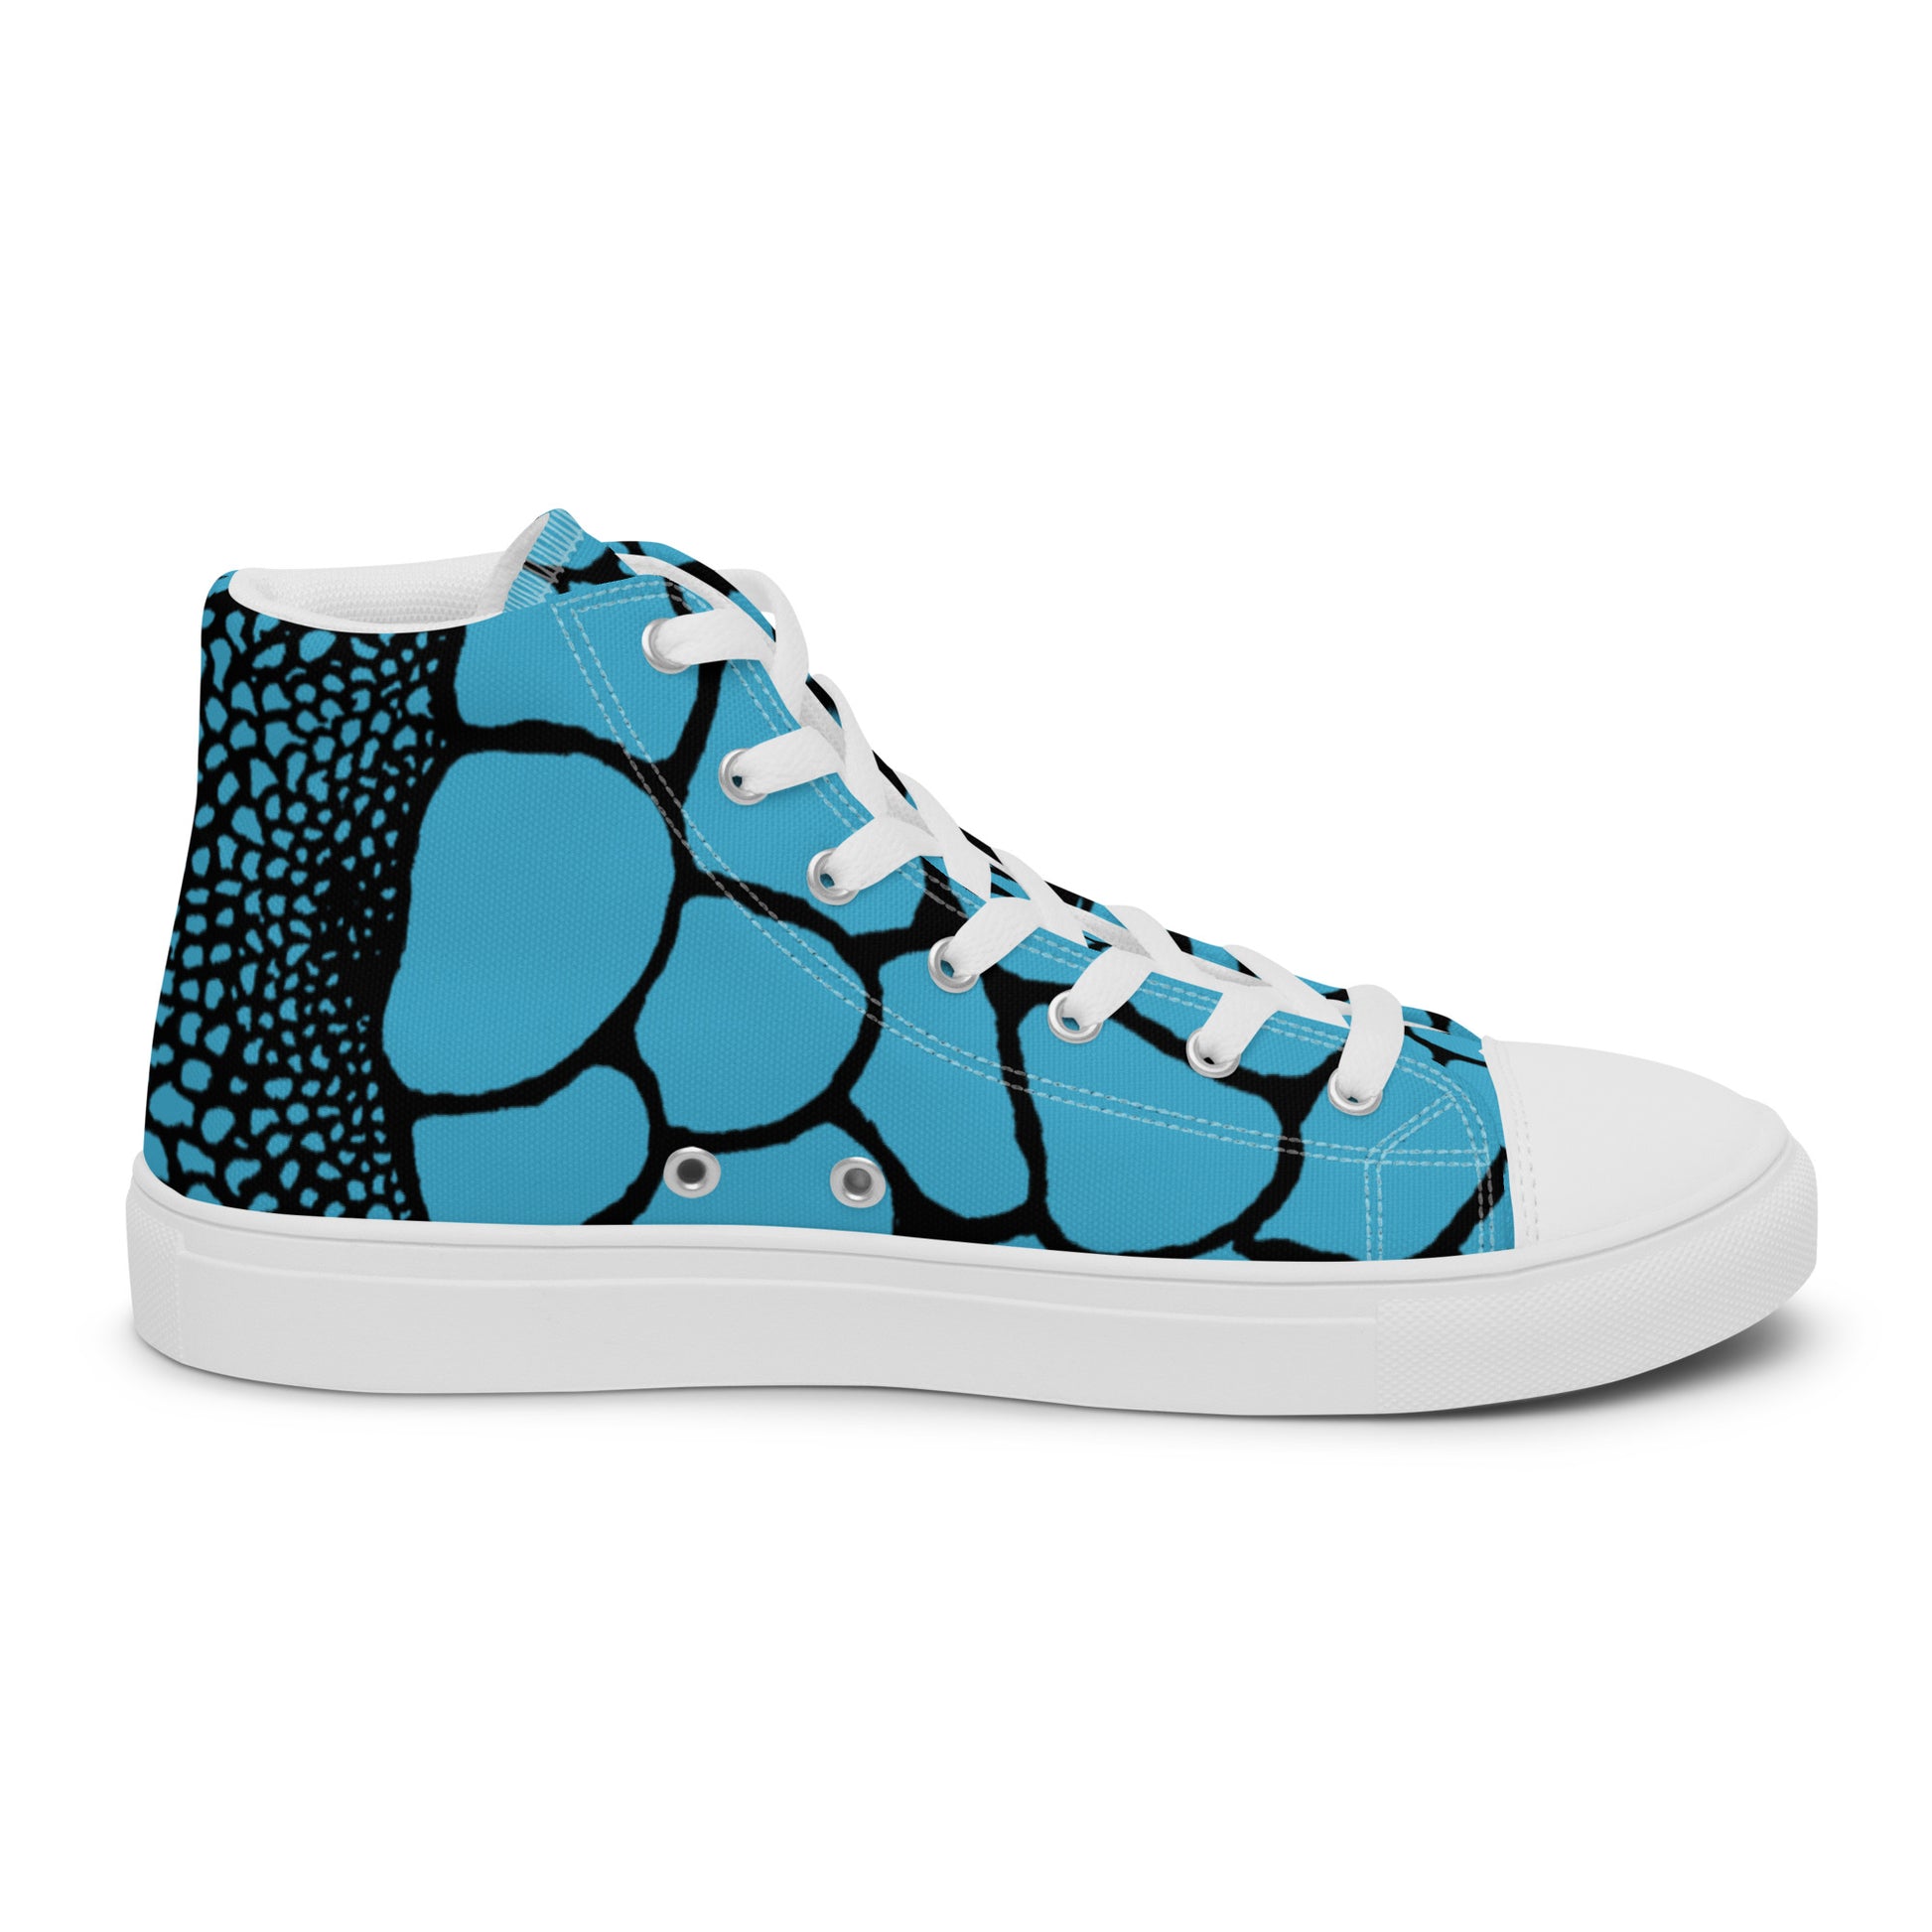 Organic Sky Blue Men’s High Top Canvas Shoes | Casual Print Shoes | Stylish Festival Sneakers | Abstract Shoes | Lace Up Sneakers | - Comfortable Culture - Shoes - Comfortable Culture